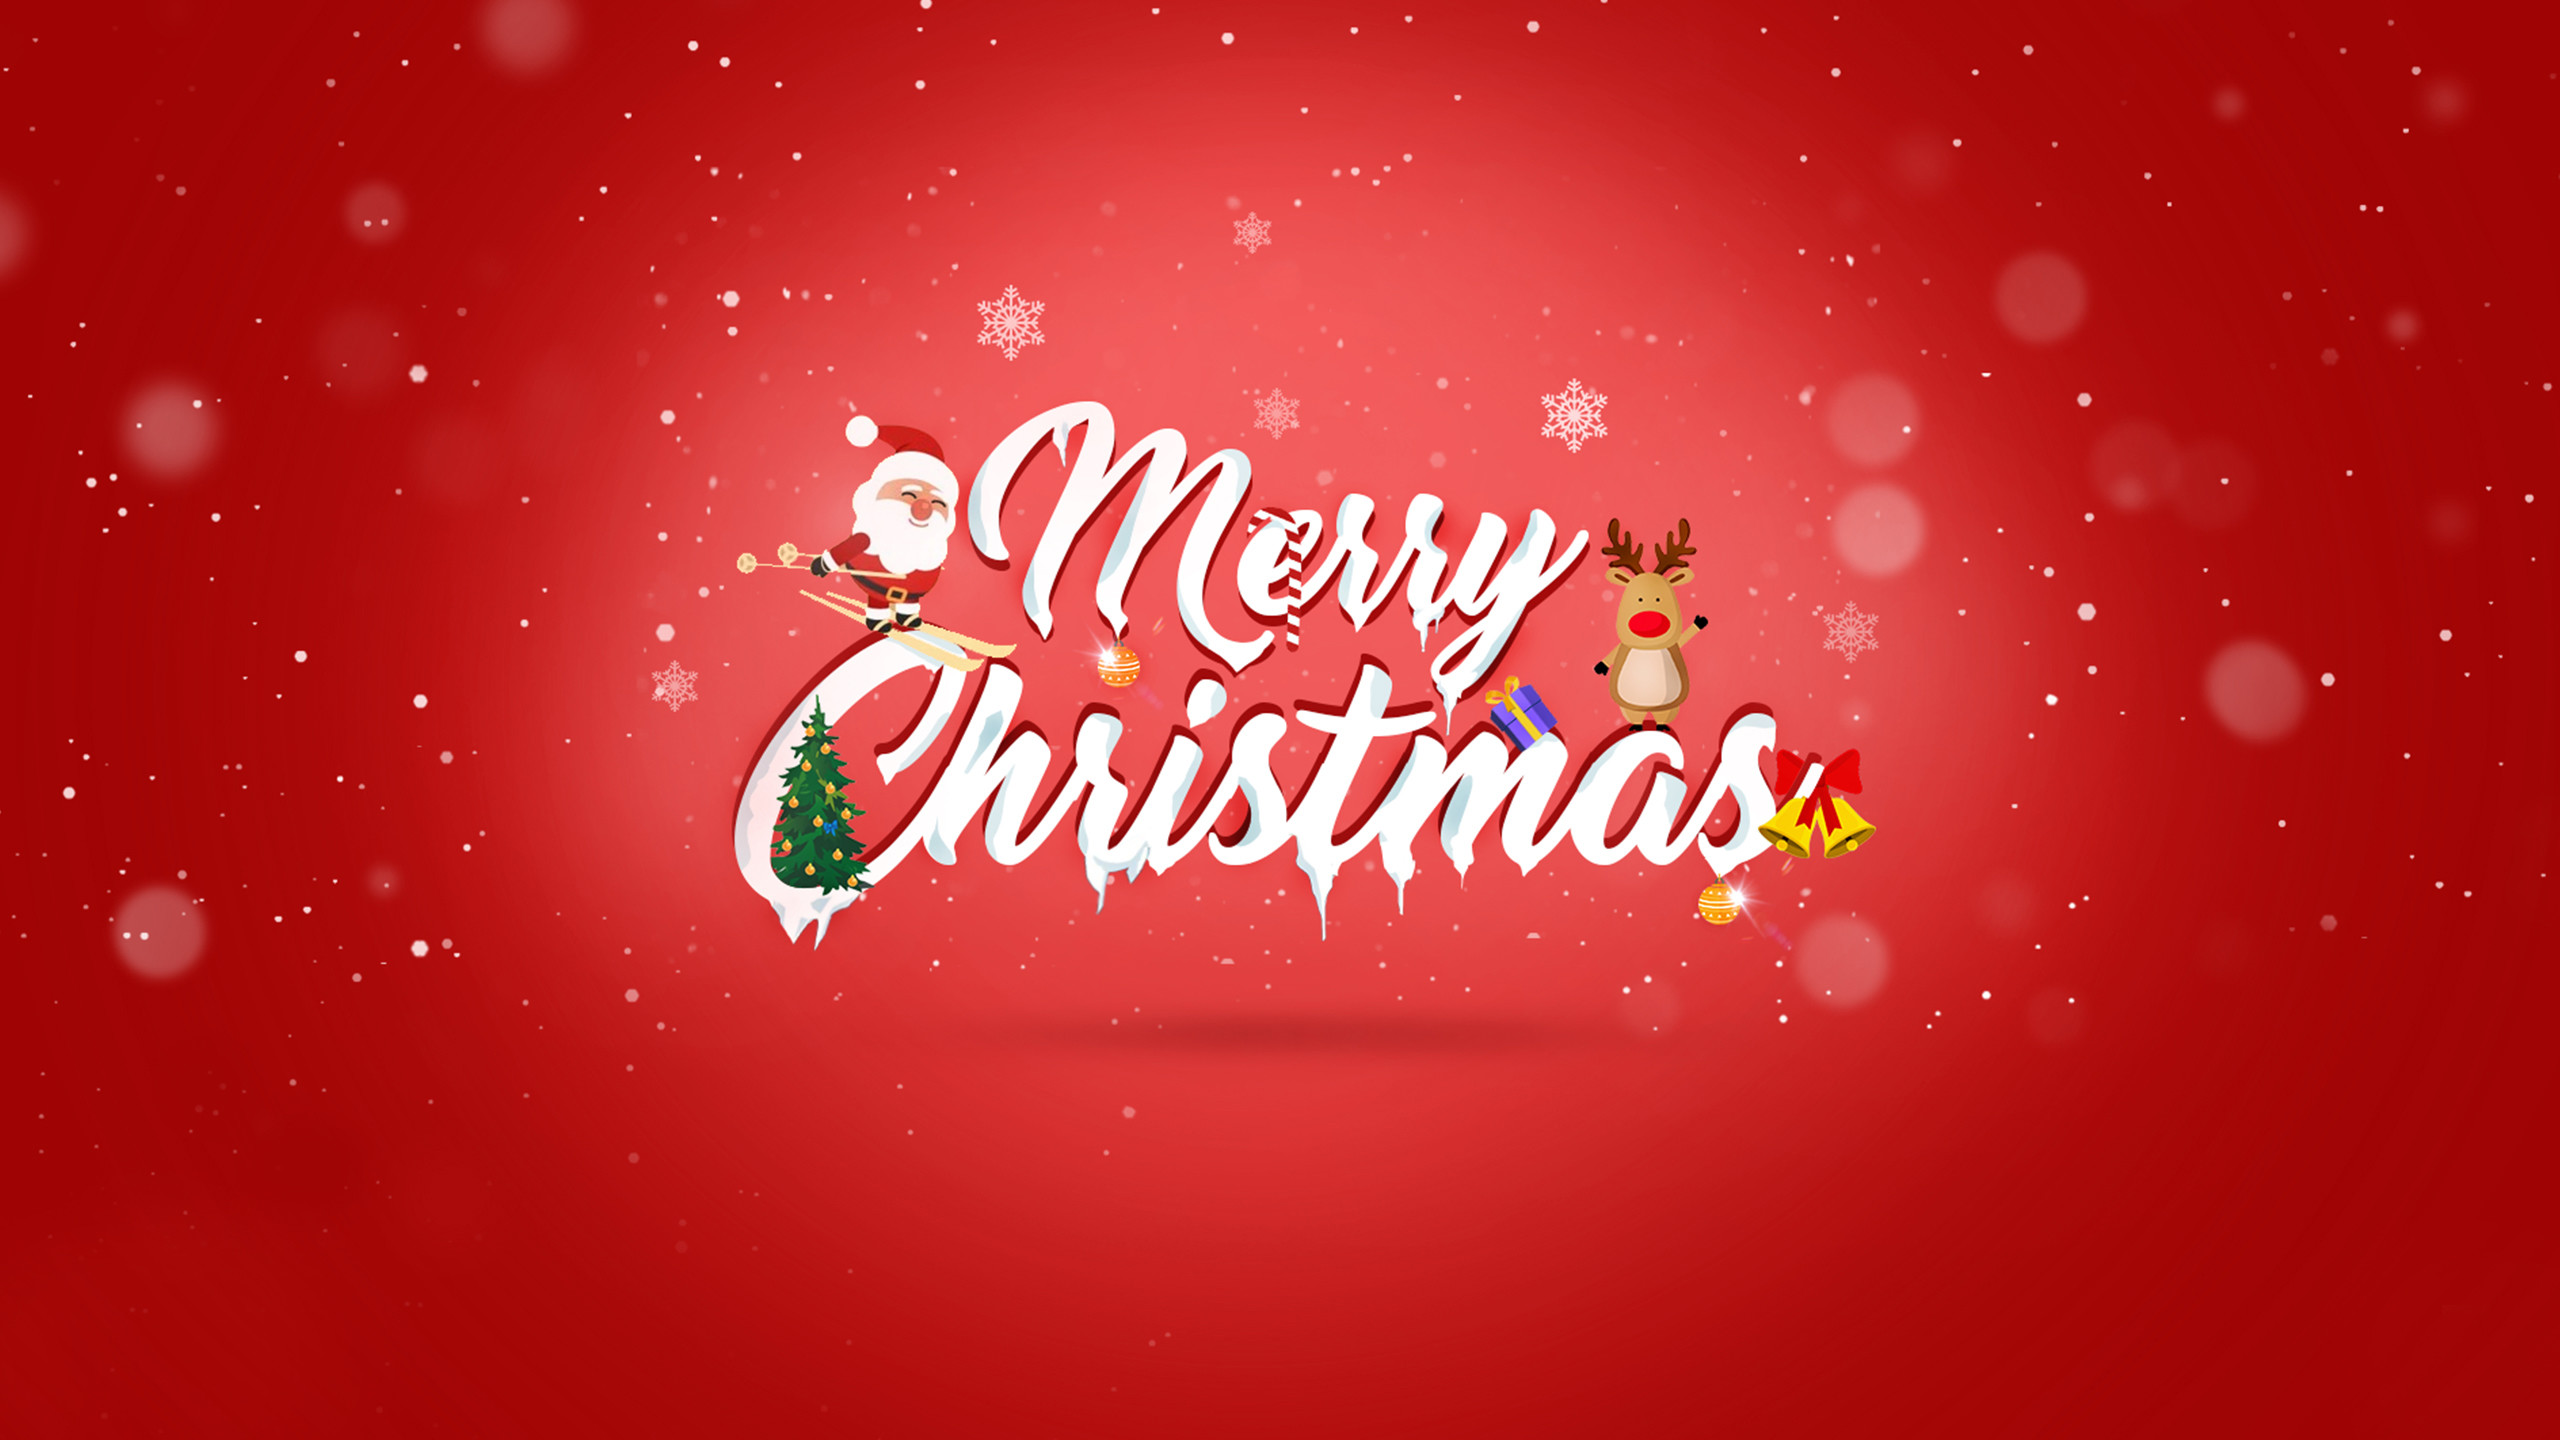 merry christmas full hd wallpaper,text,red,font,illustration,graphics